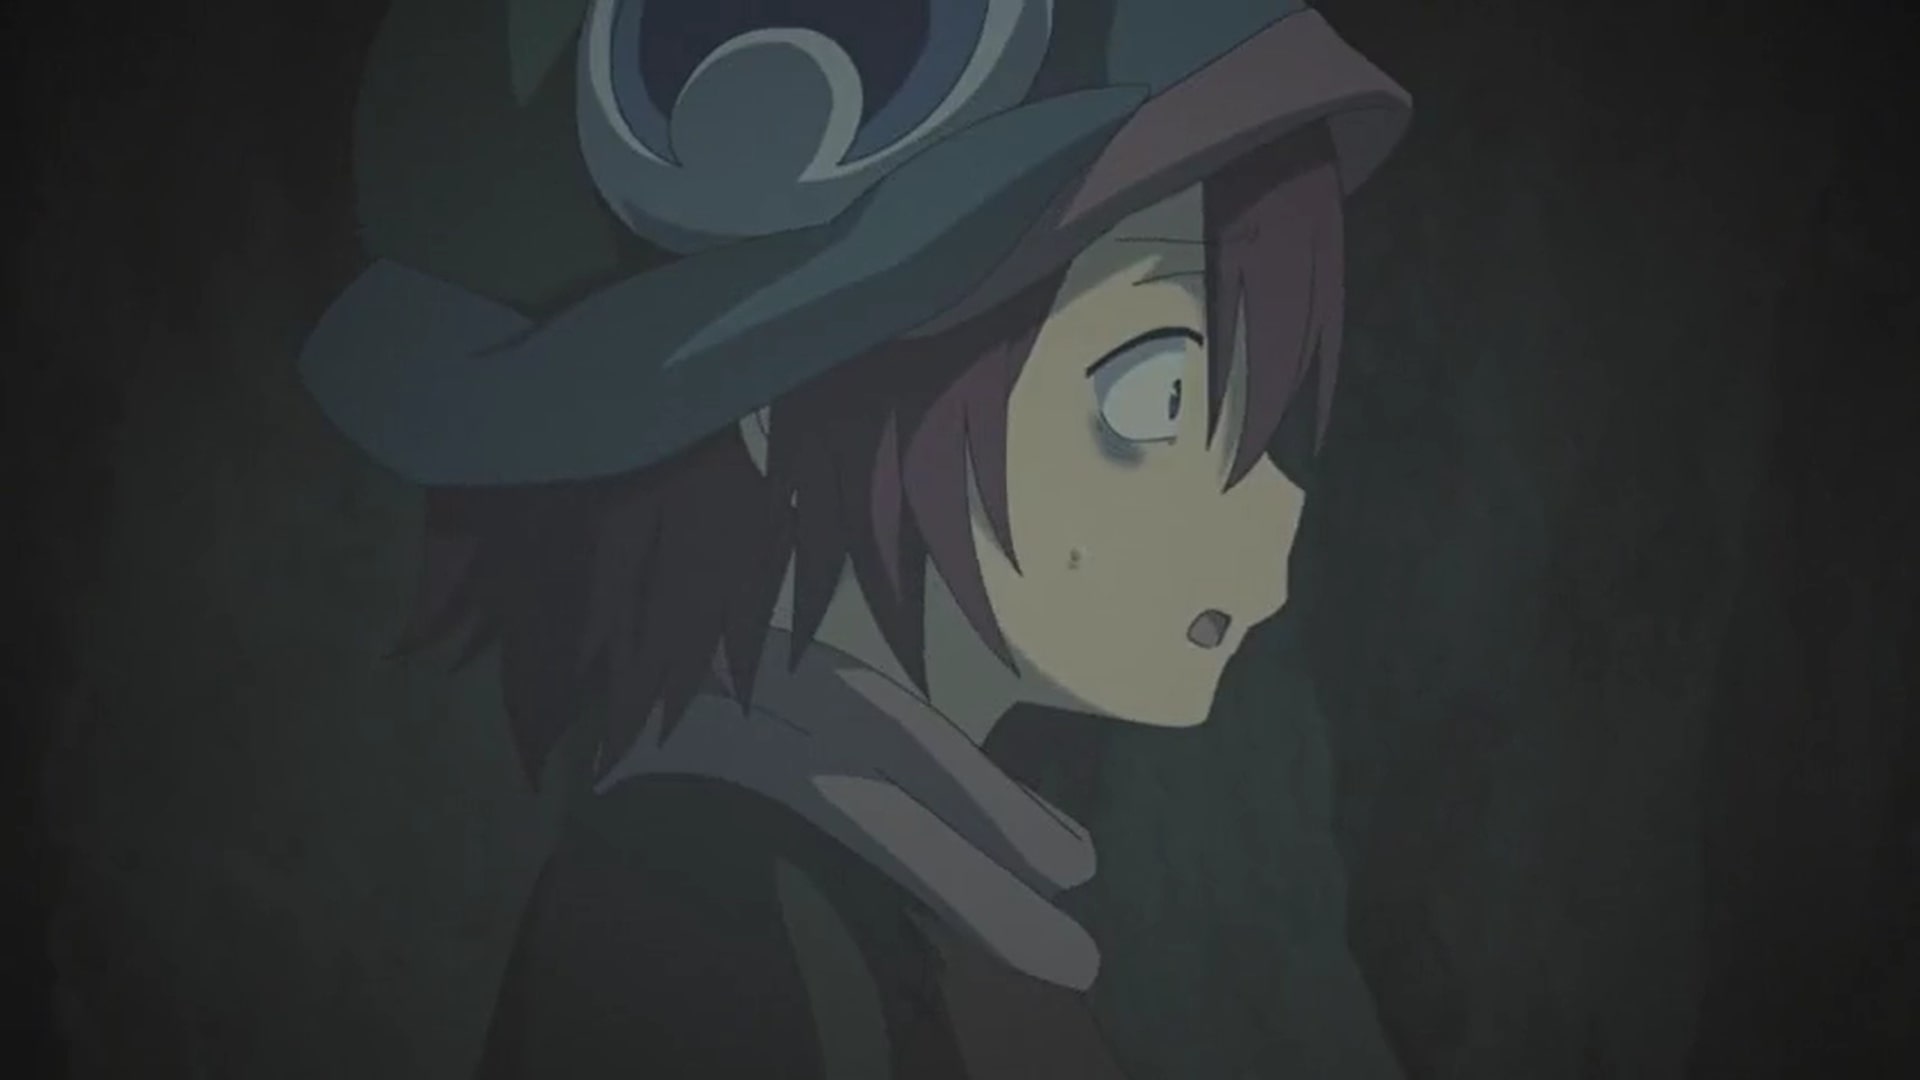 Made in Abyss Season 2 Episode 7 Recap and Ending, Explained